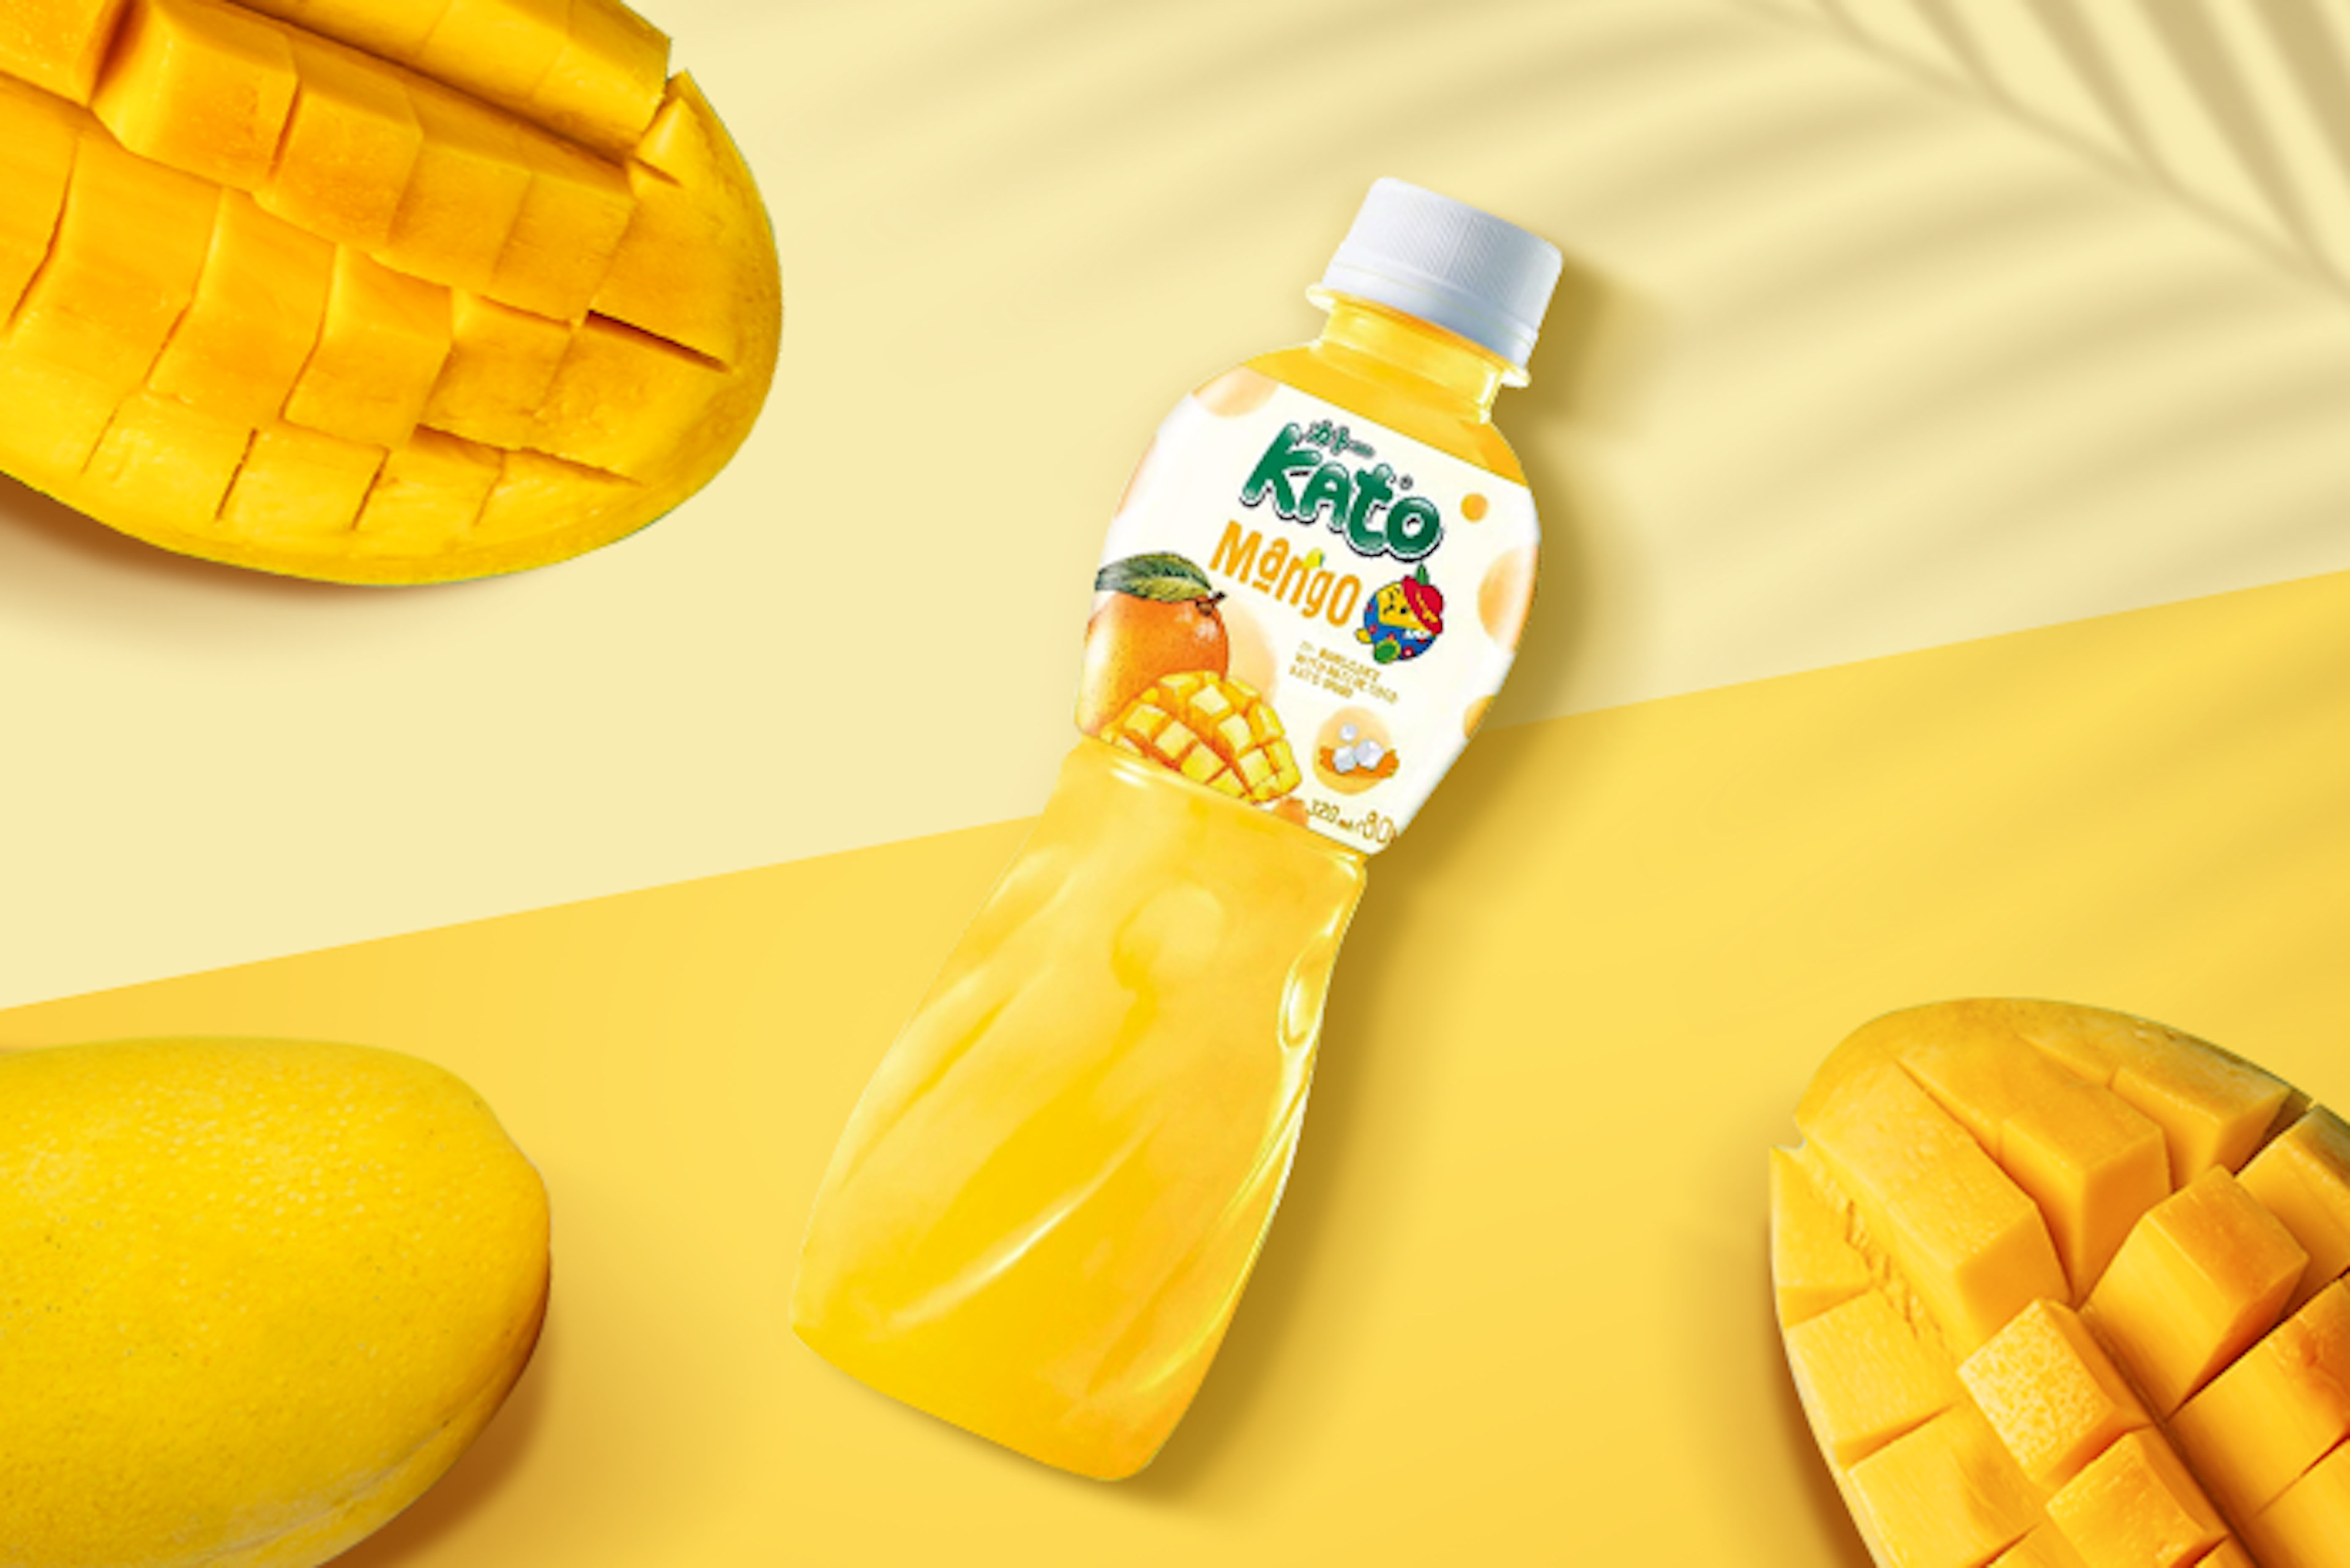 KATO Mango Juice with Nata De Coco 320ml - Refreshing and Fruity Drink